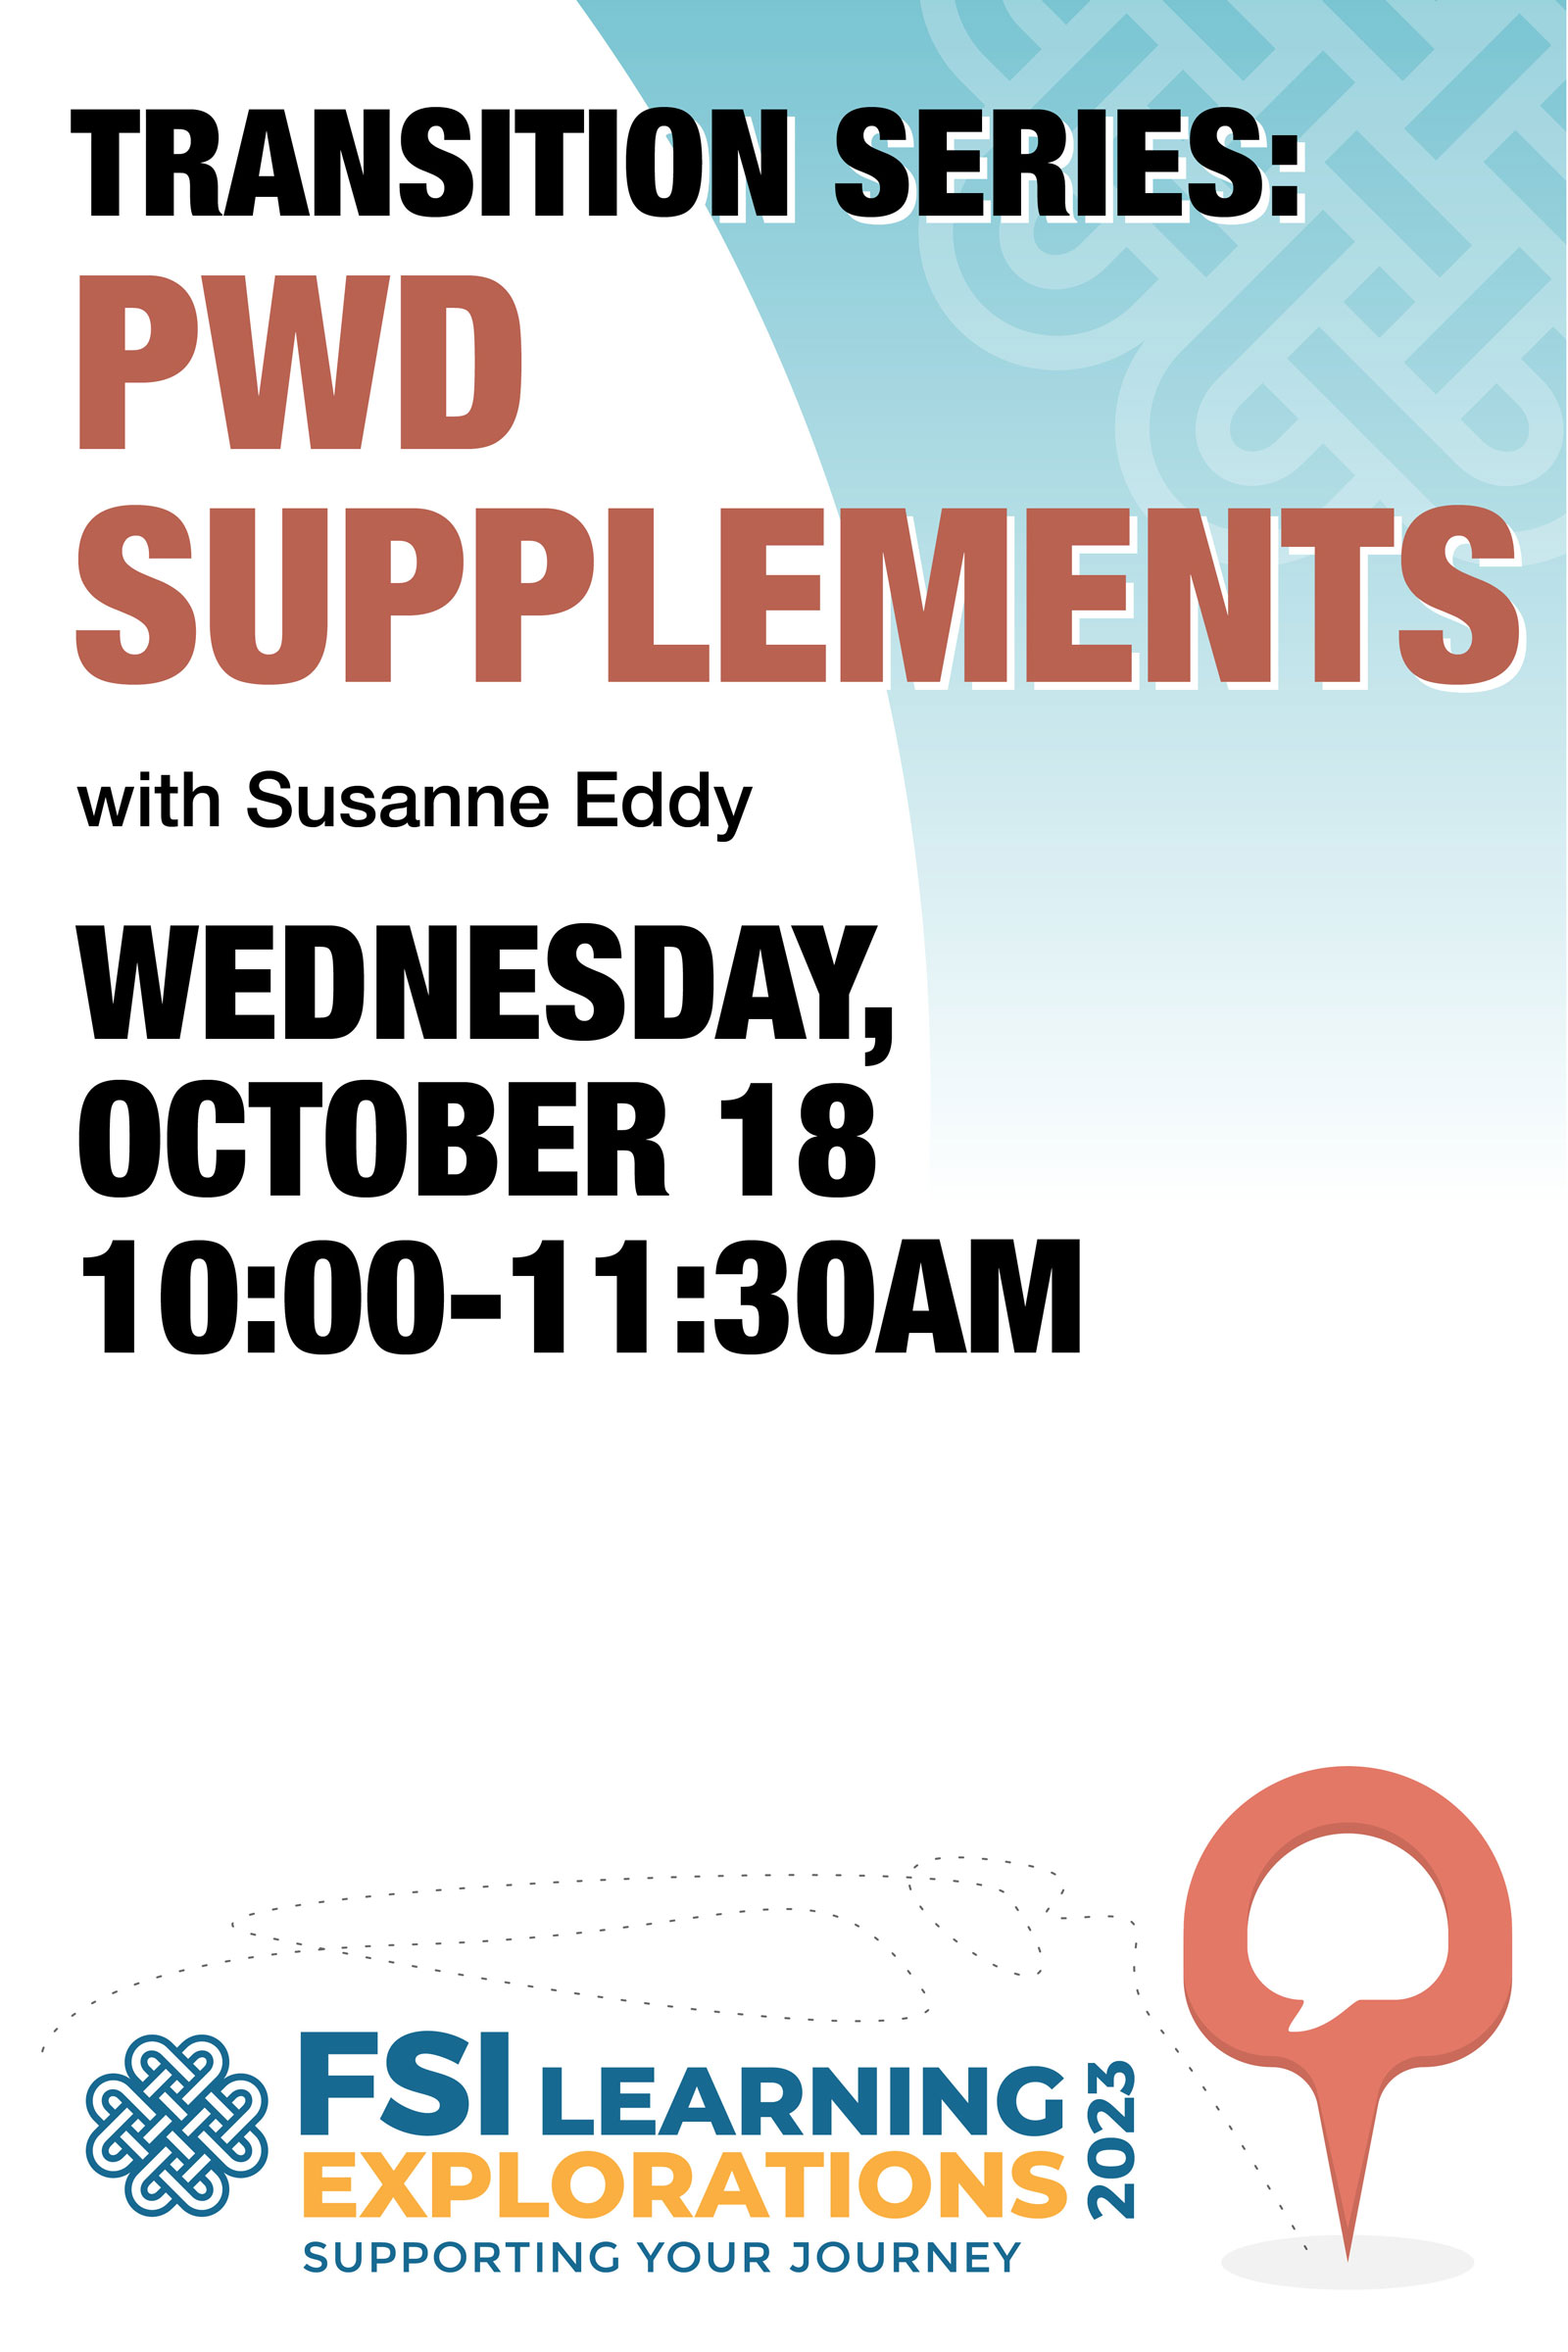 FSI Learning Explorations ~ Transition Series: PWD Supplements